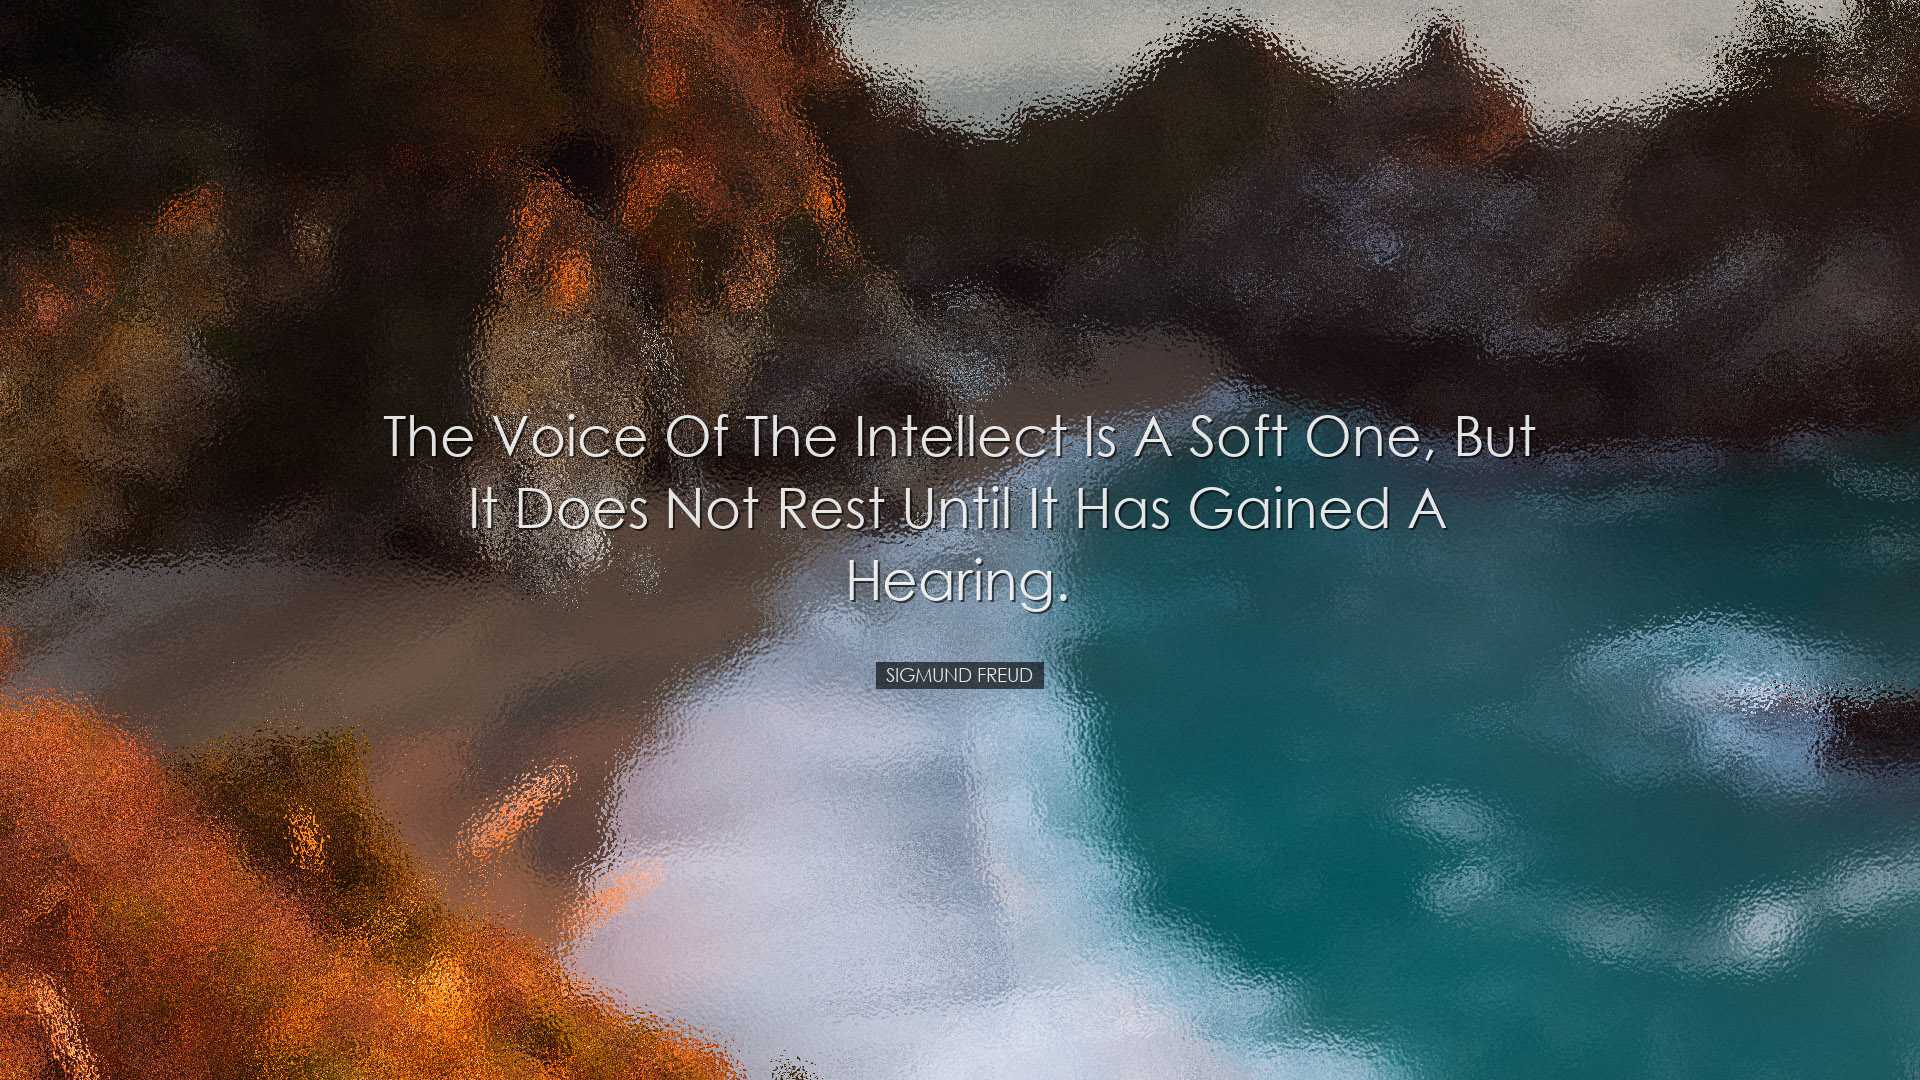 The voice of the intellect is a soft one, but it does not rest unt